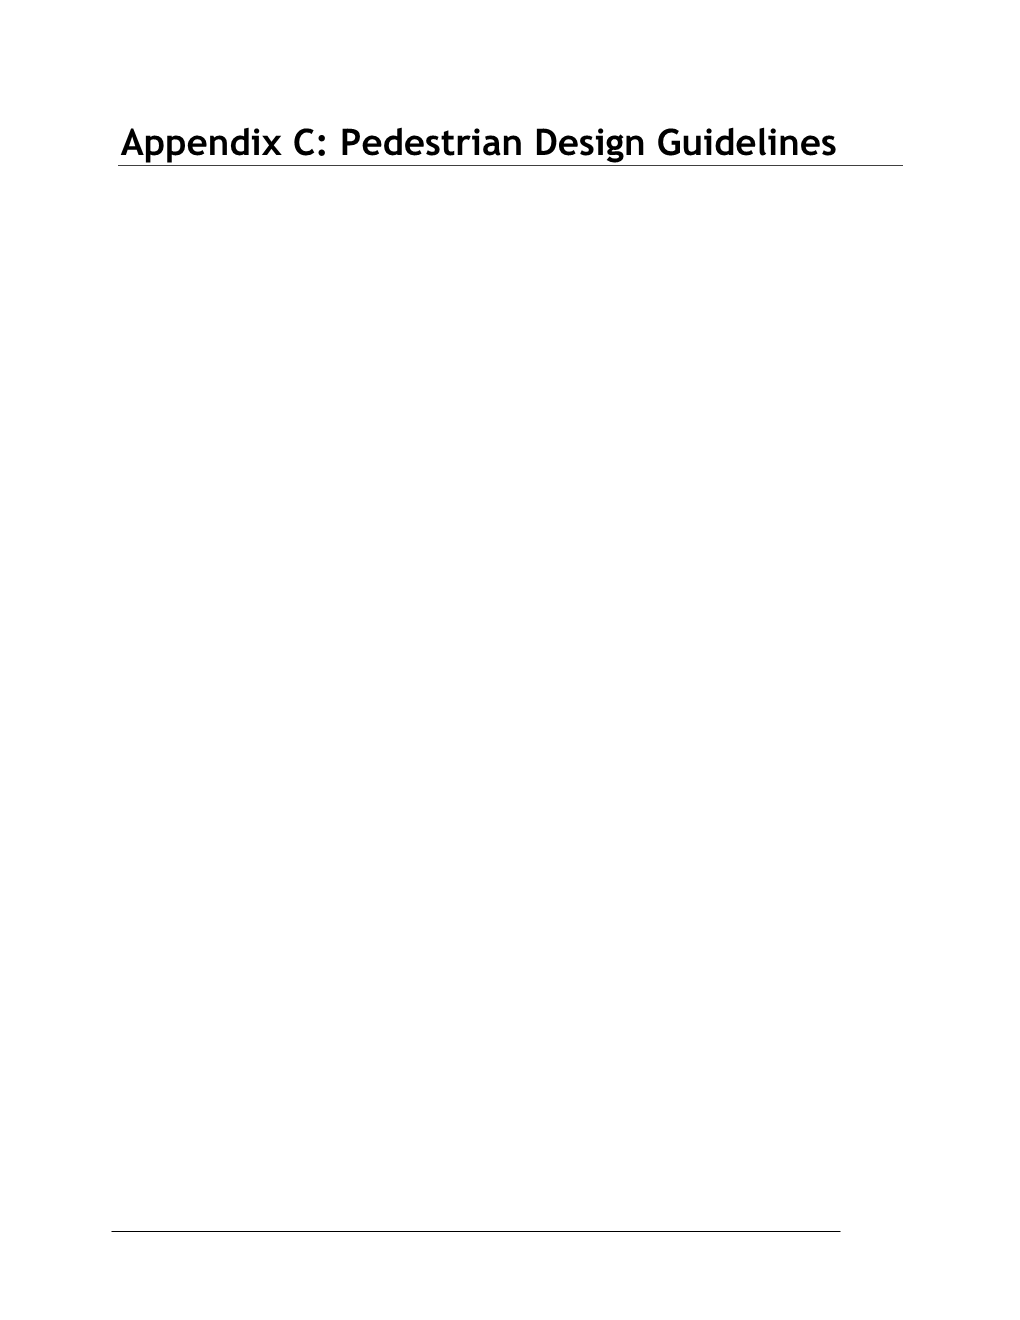 Appendix C: Pedestrian Design Guidelines This Page Intentionally Left Blank 1.0 RATIONALE for the DESIGN GUIDELINES